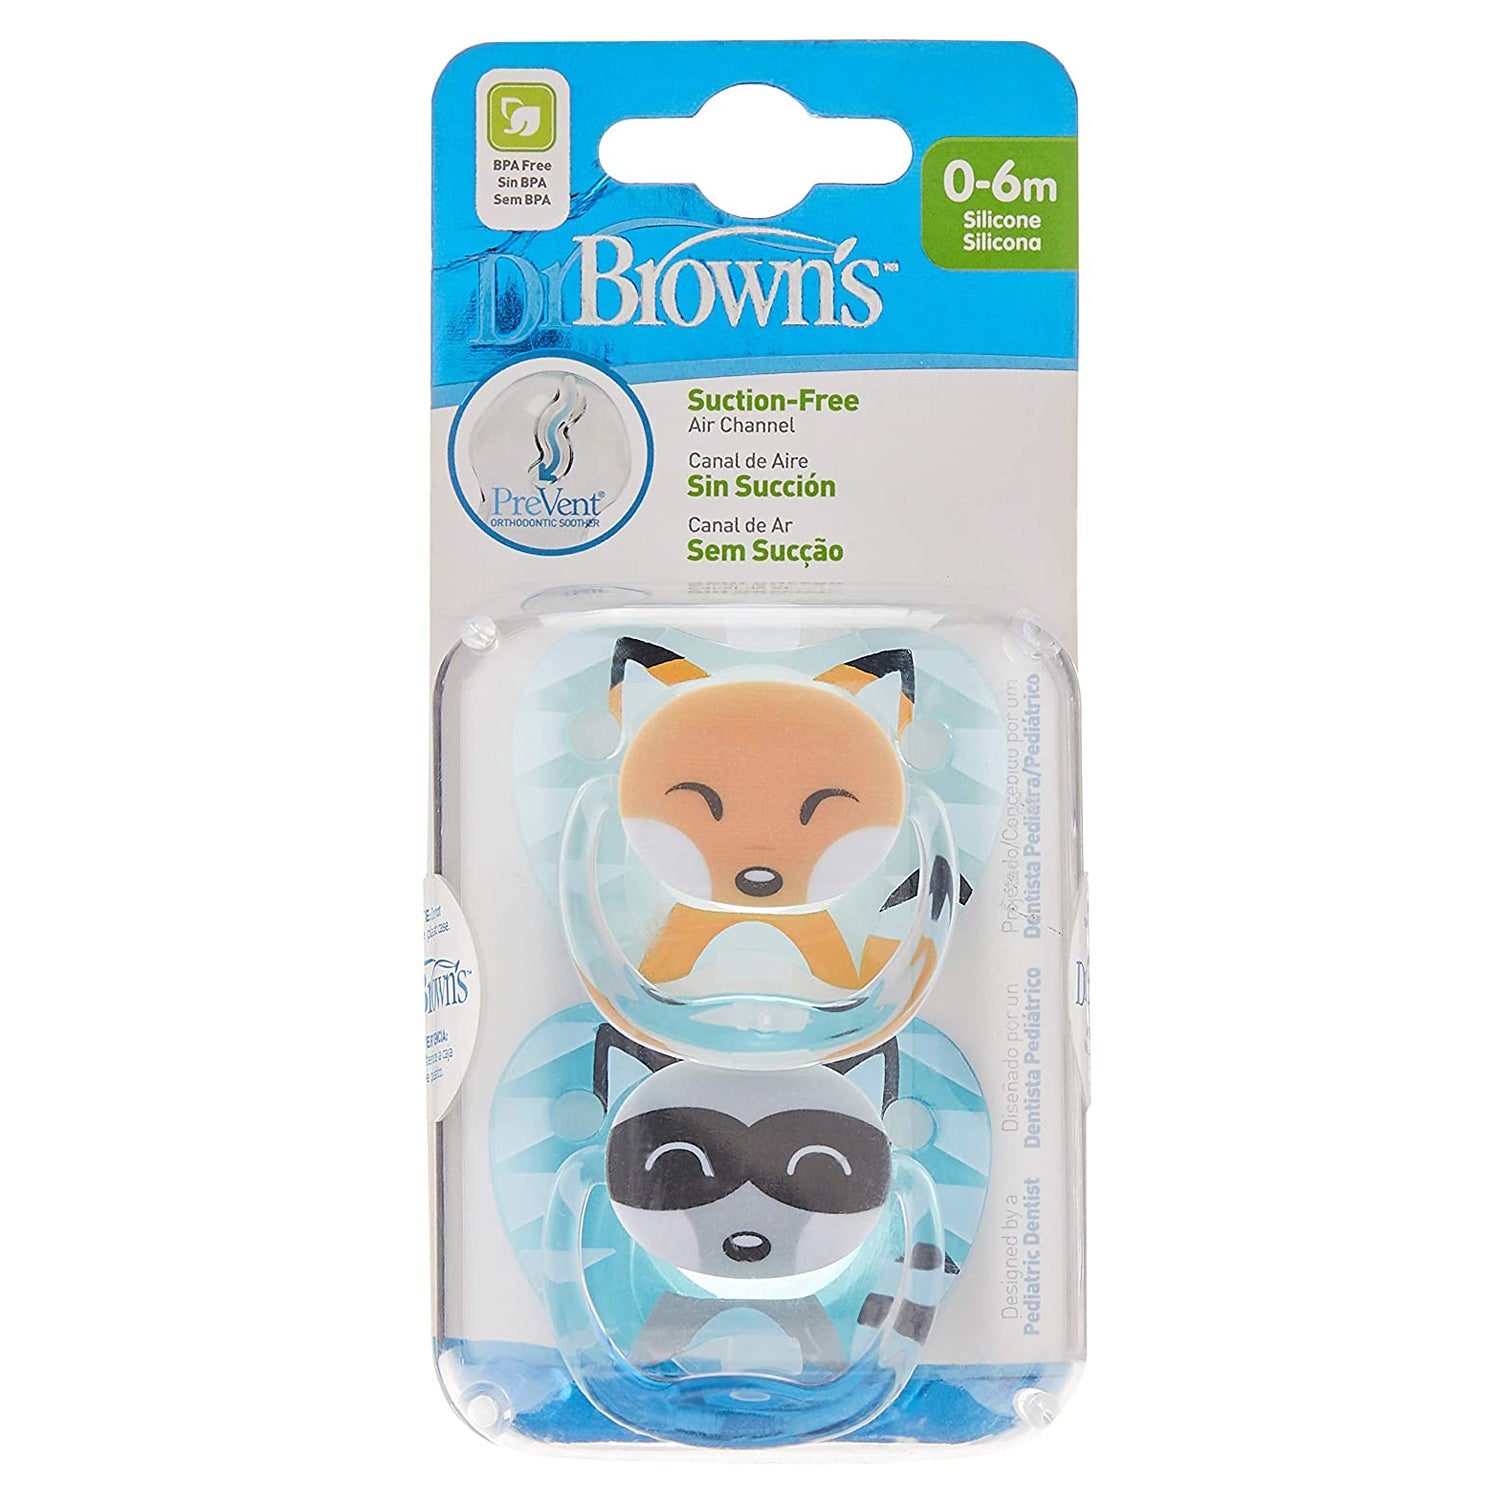 Dr. Brown's Prevent Printed Shield Soother - Stage 1, Pack of 2 - Teal & Grey